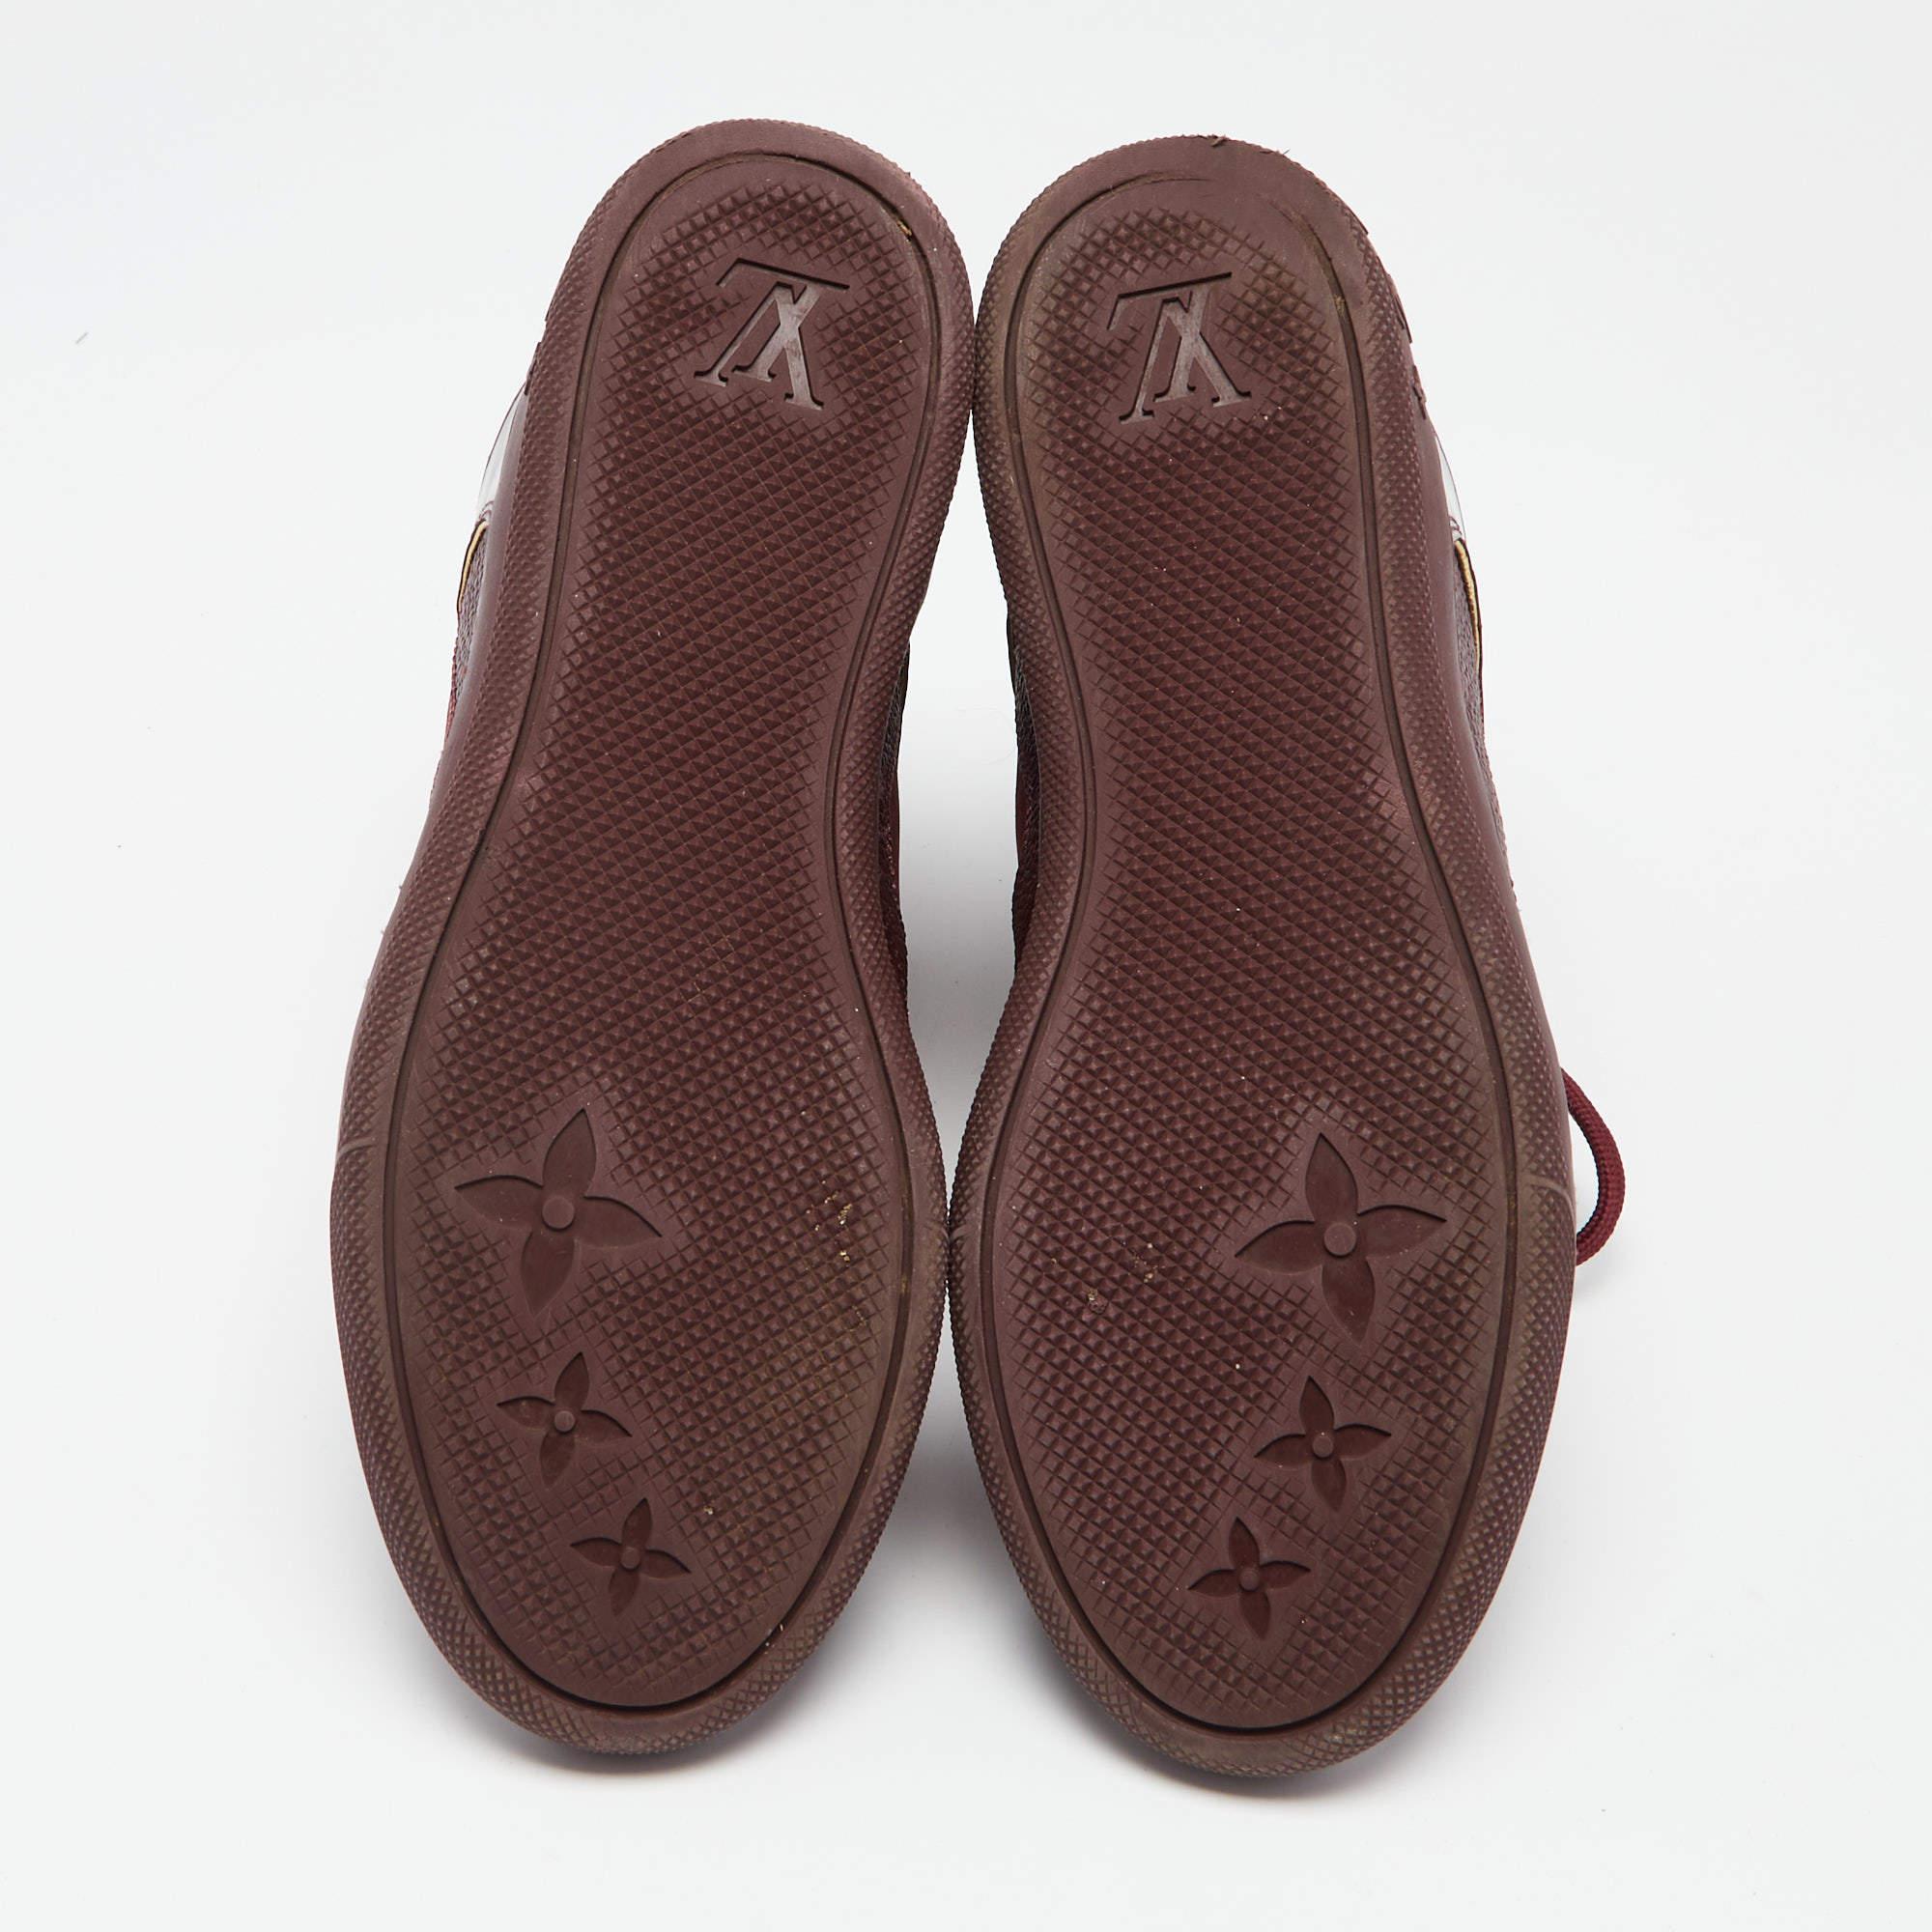 Louis Vuitton Burgundy Leather And Monogram Suede Millenium Sneakers Size 36.5 For Sale 4